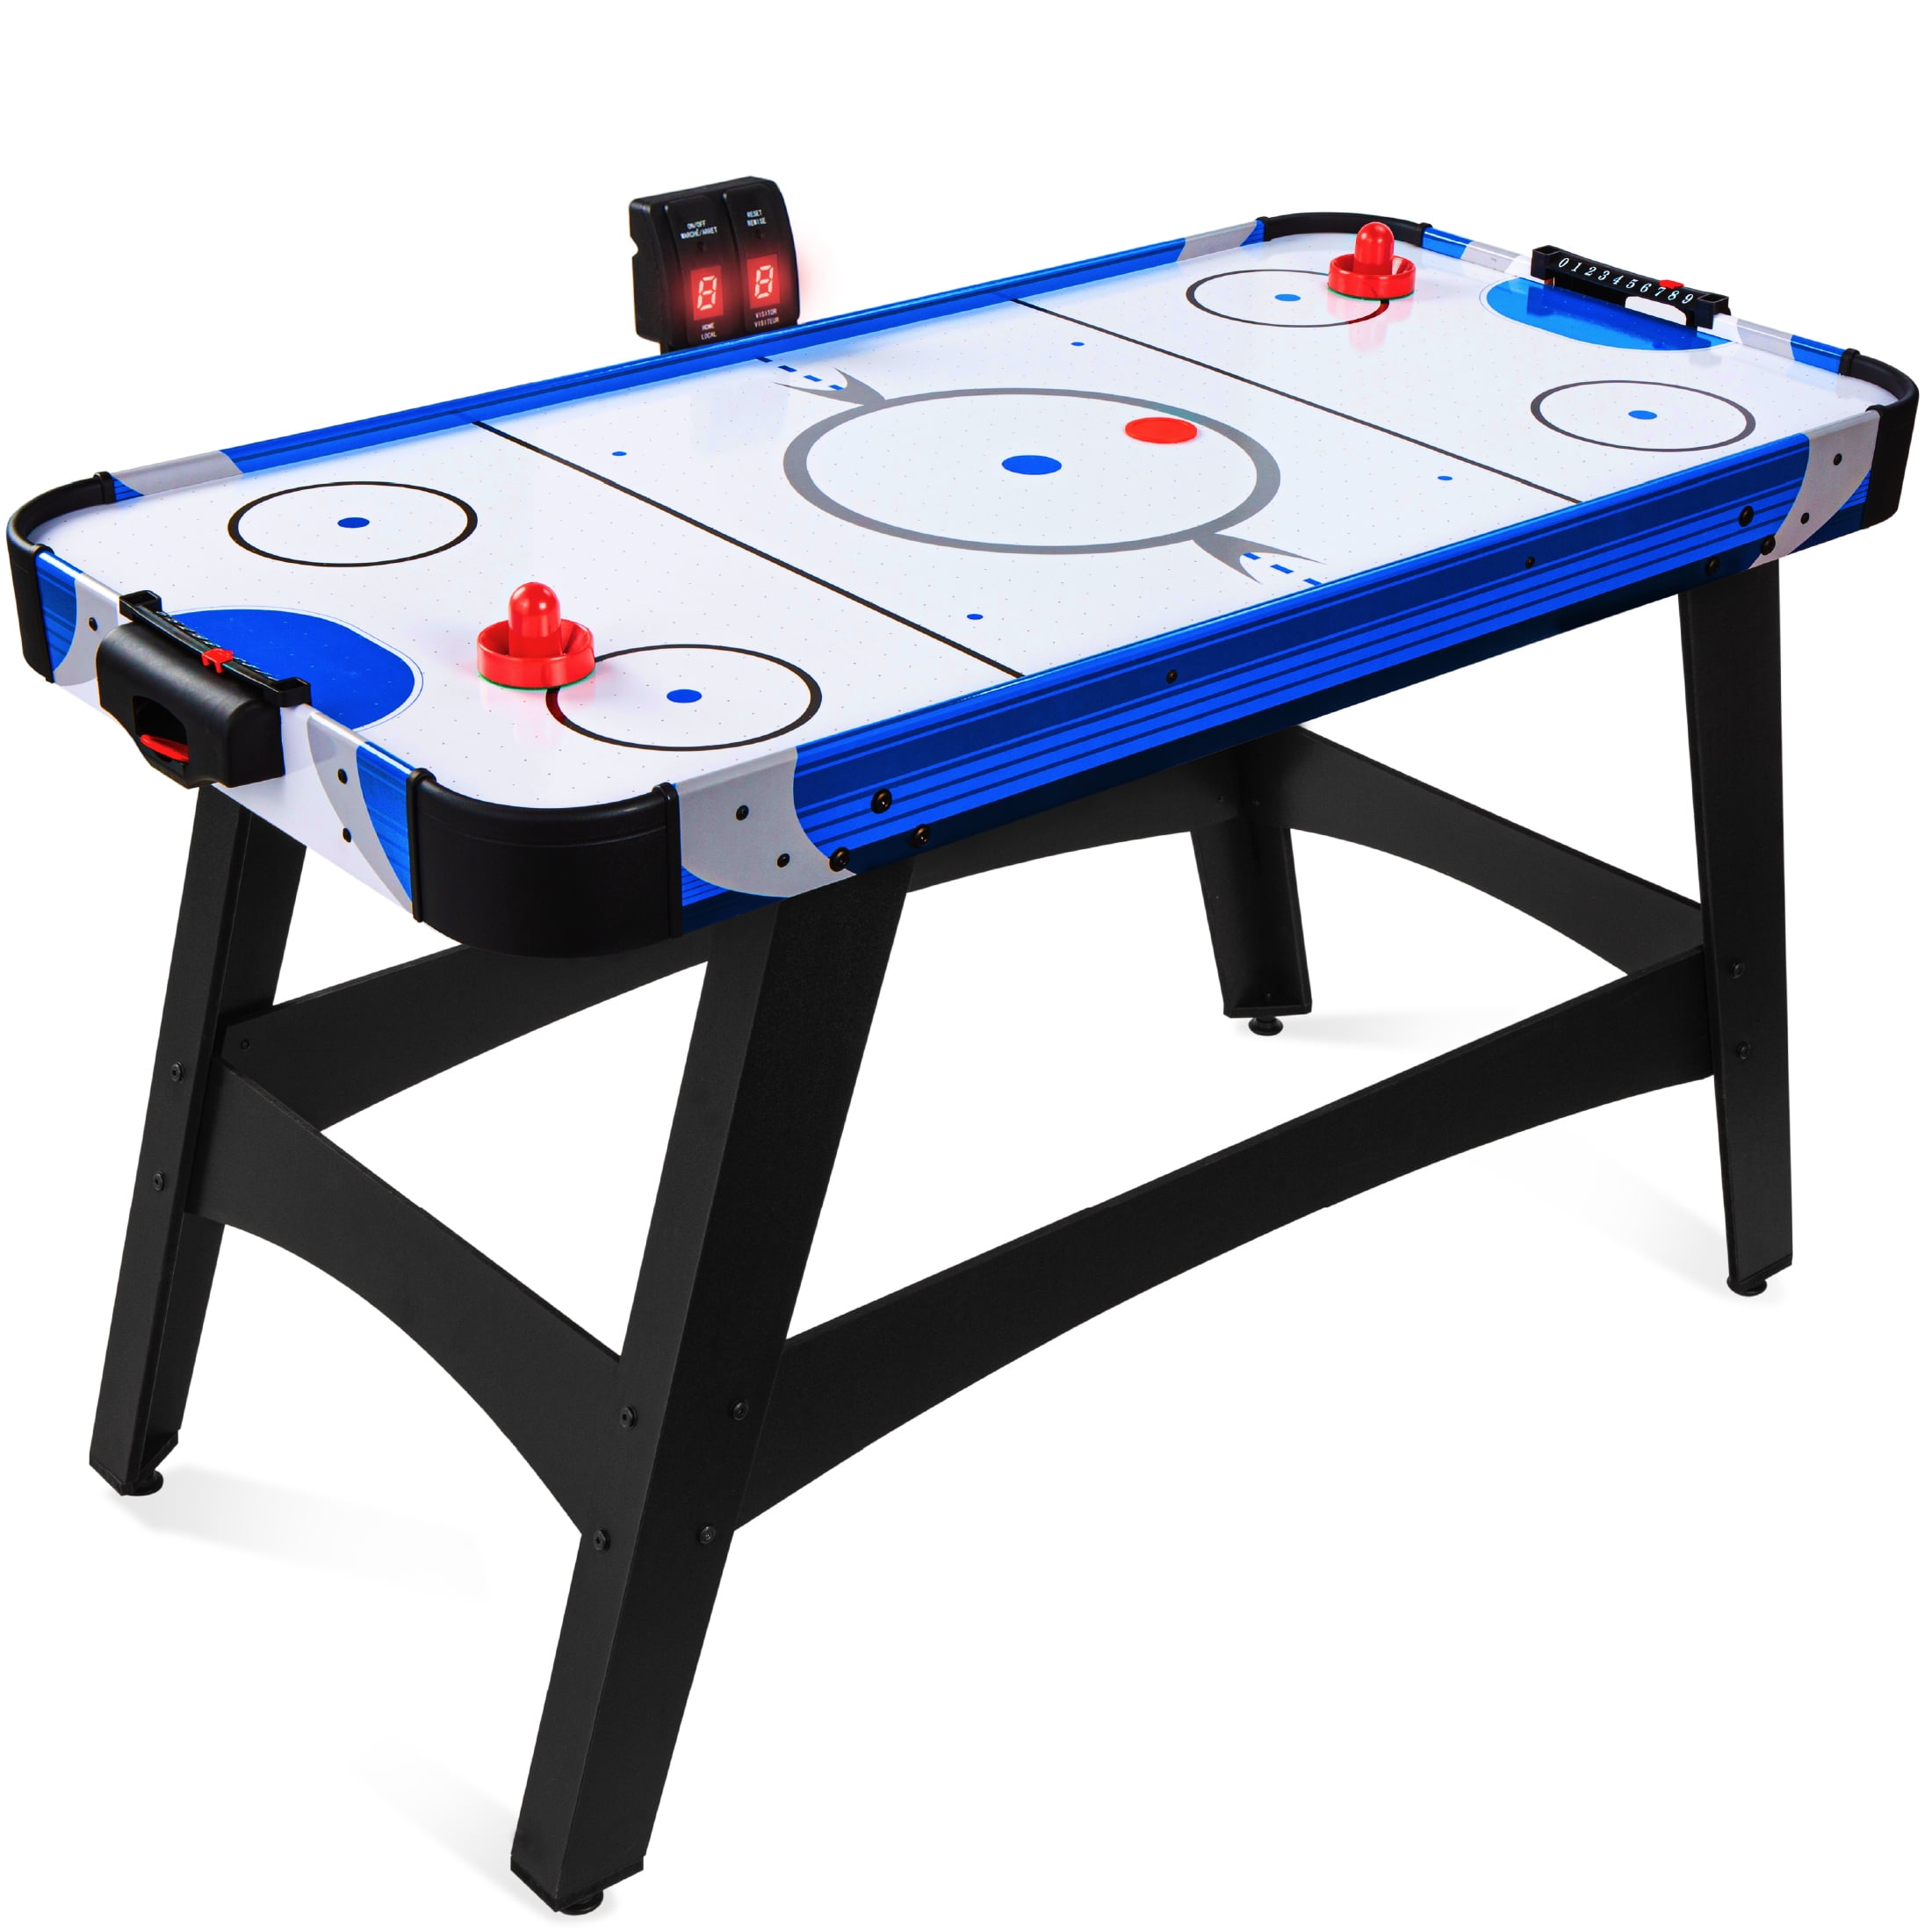 10 Mini Stick Hockey Games for 1 to 4+ Players – Local Legend Toys